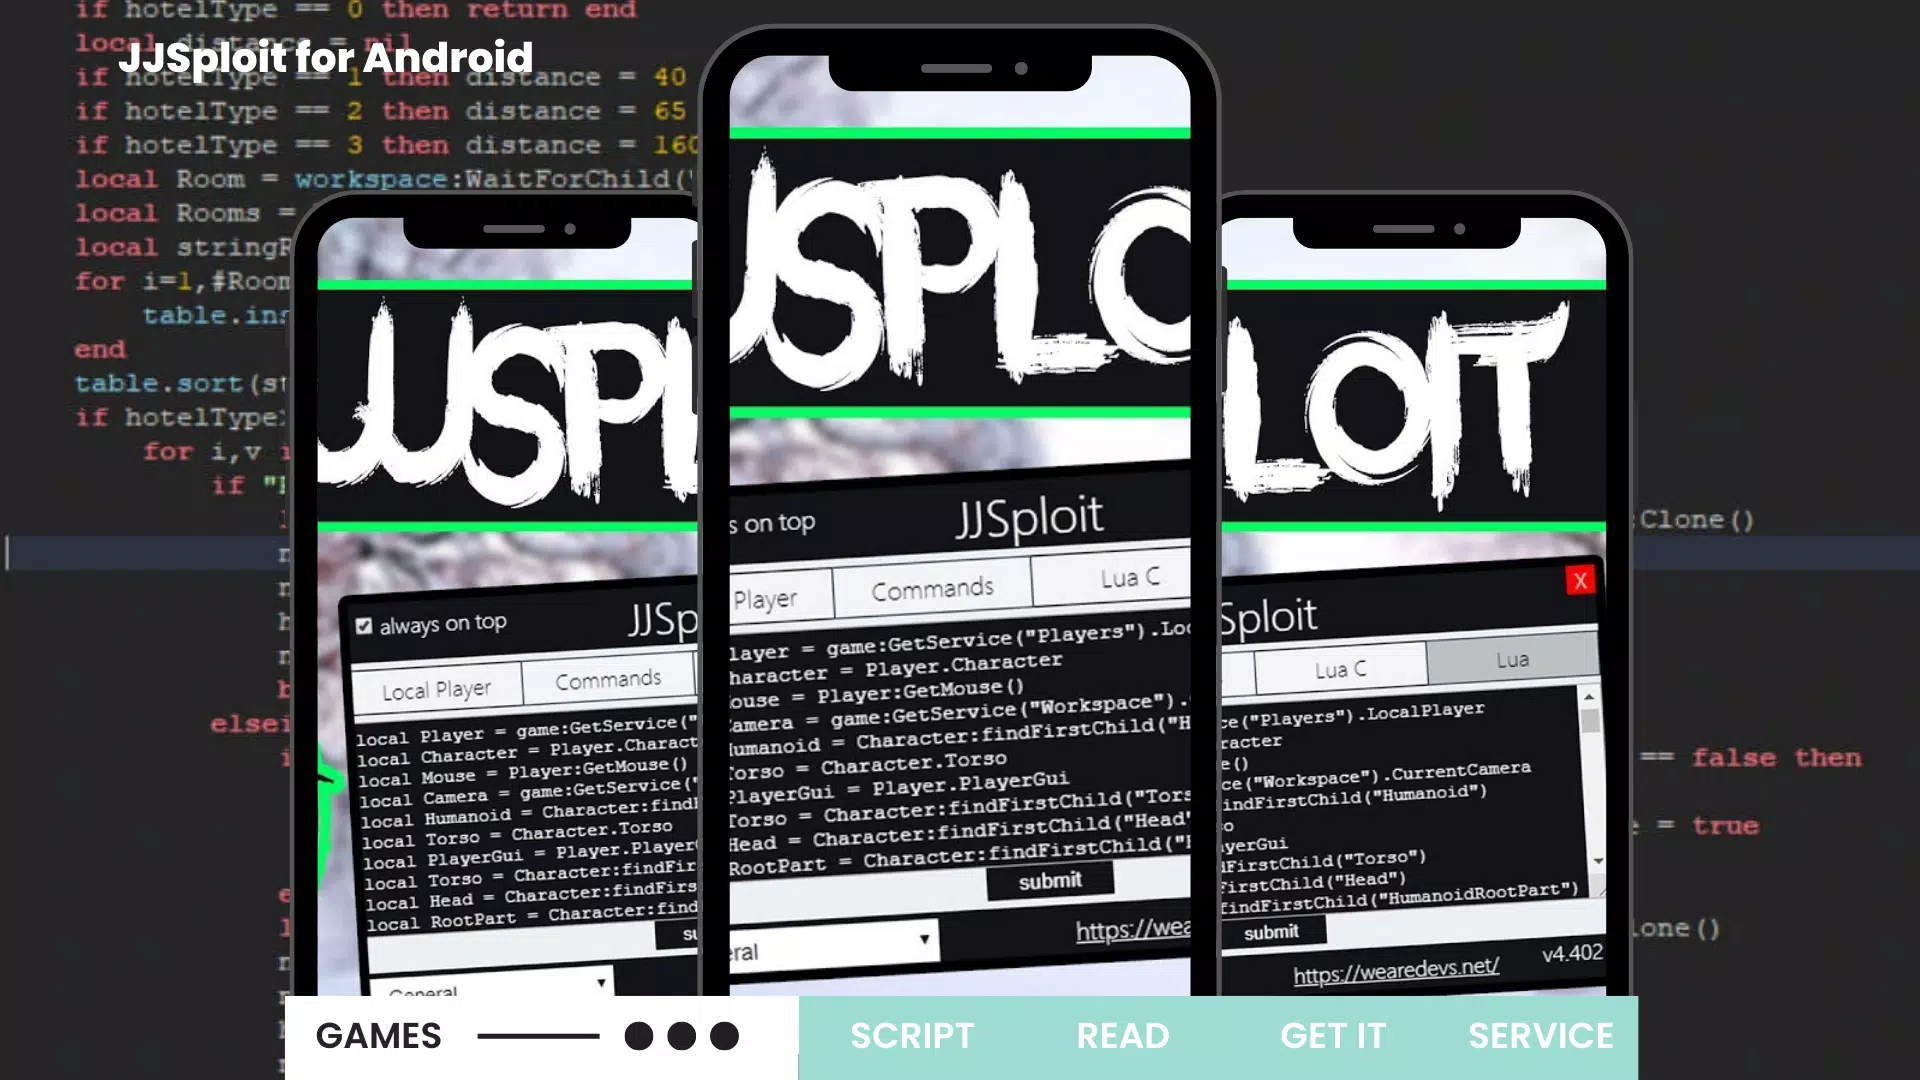 Download do APK de JJsploit - full reference para Android